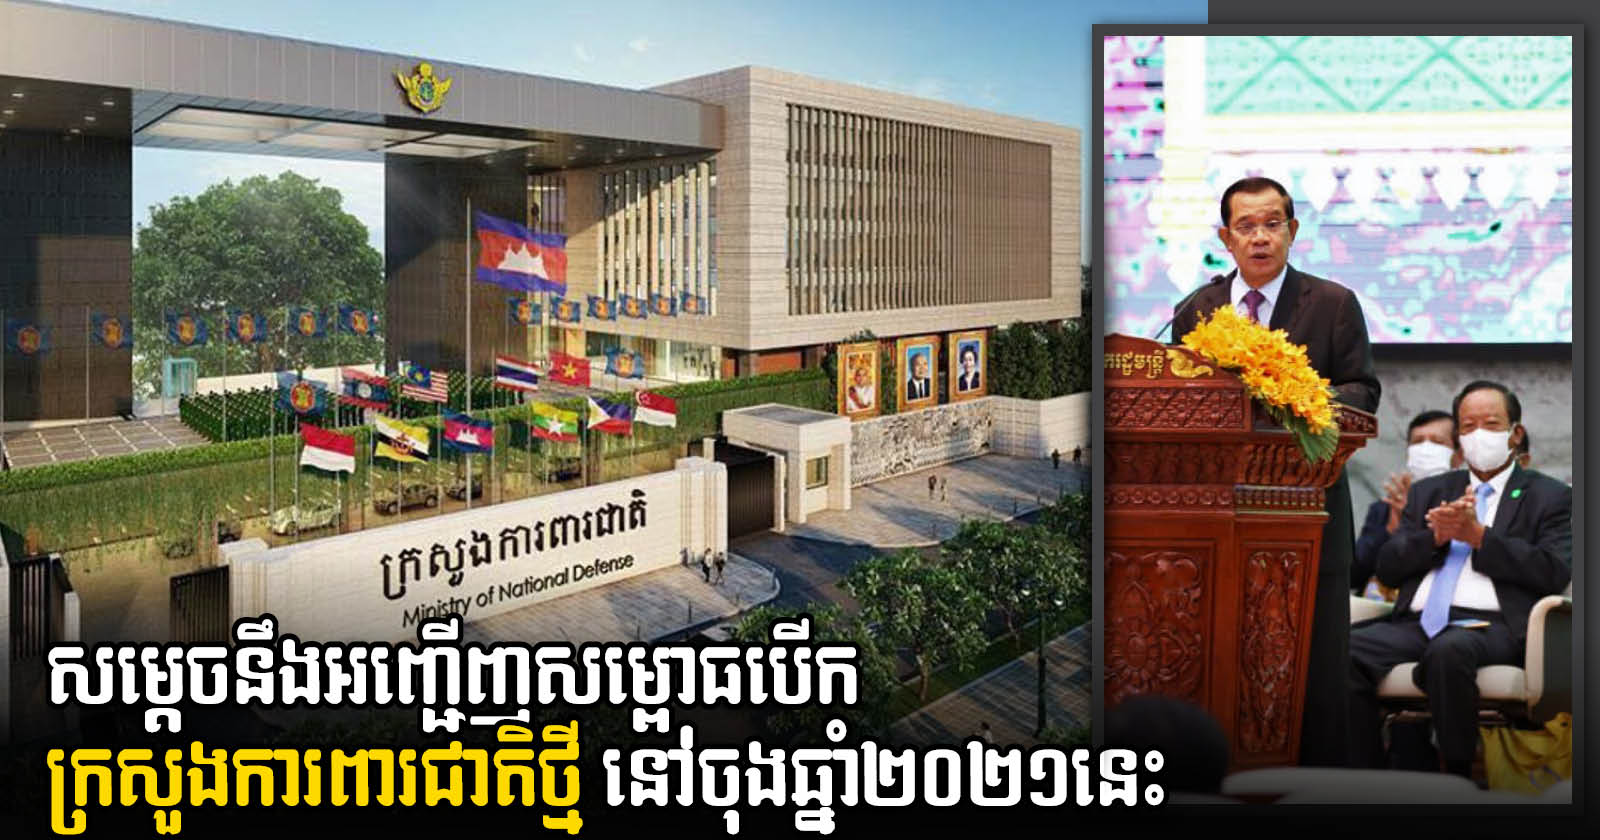 New Ministry of National Defence to Be Officially Inaugurated by Years End